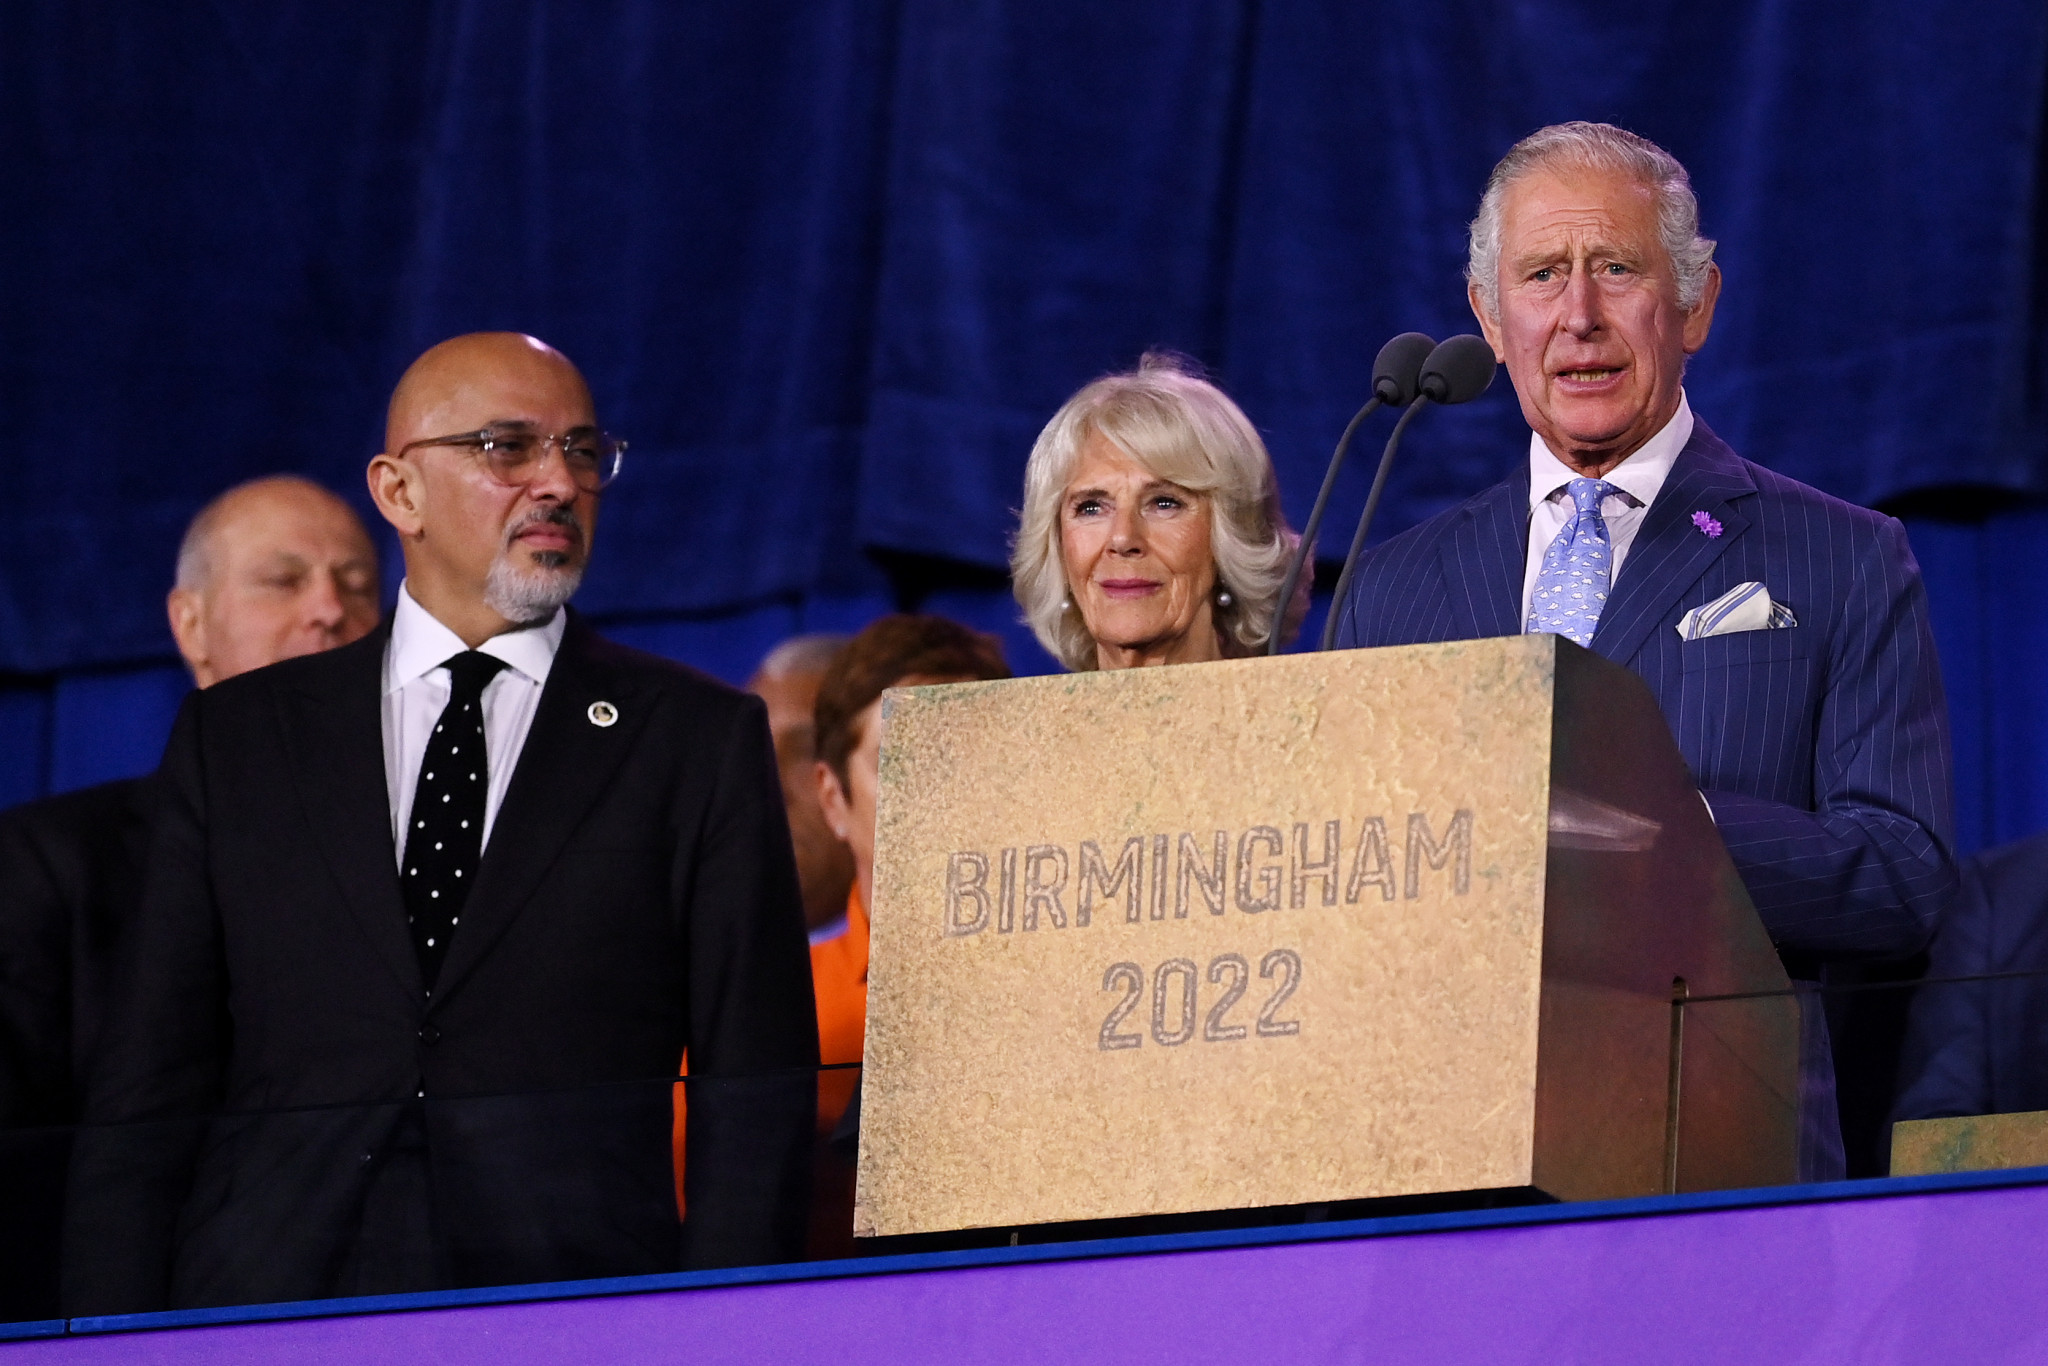 Prince Charles read the Queen's message at Birmingham 2022 ©Getty Images